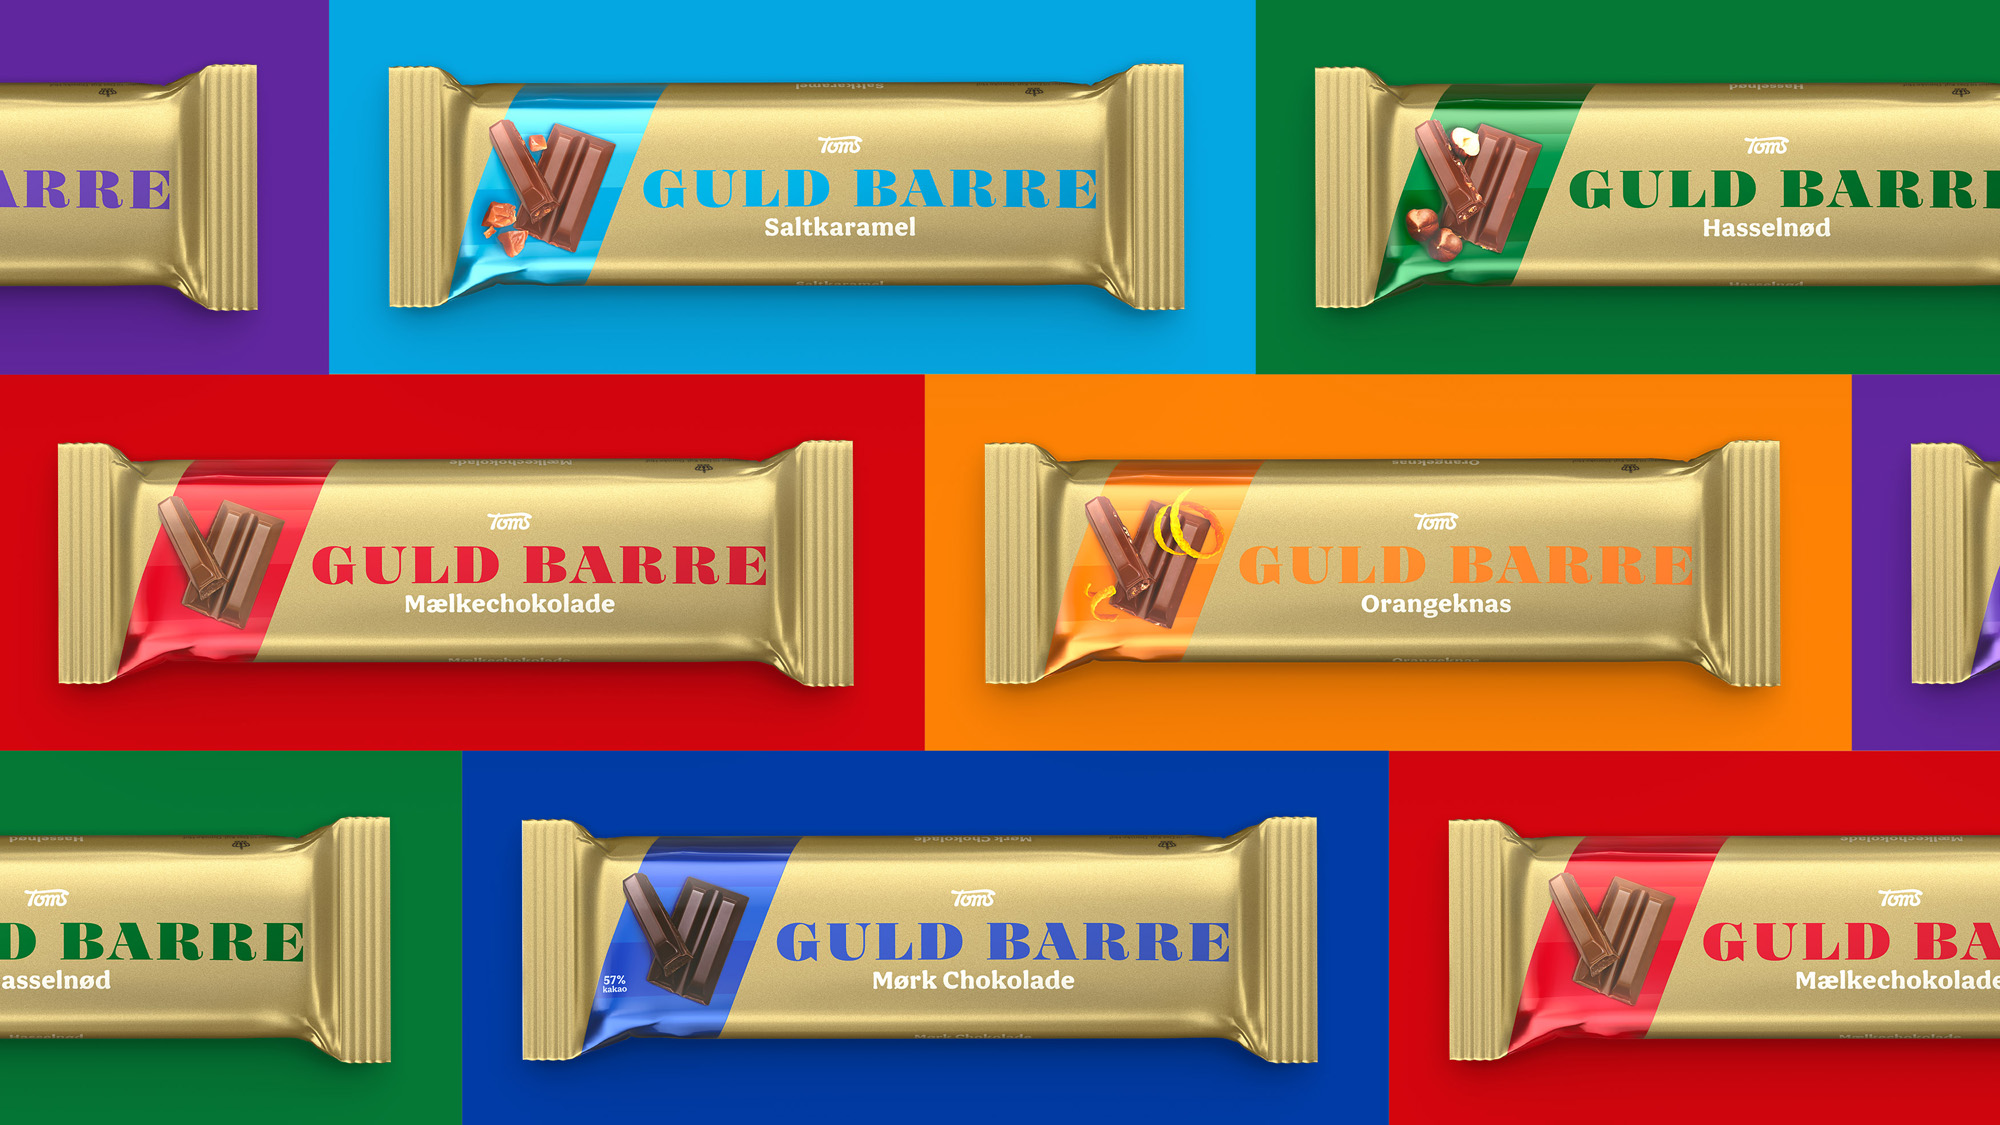 New Design Recipe for Danish Chocolate Icon the Toms Guld Barre by Everland